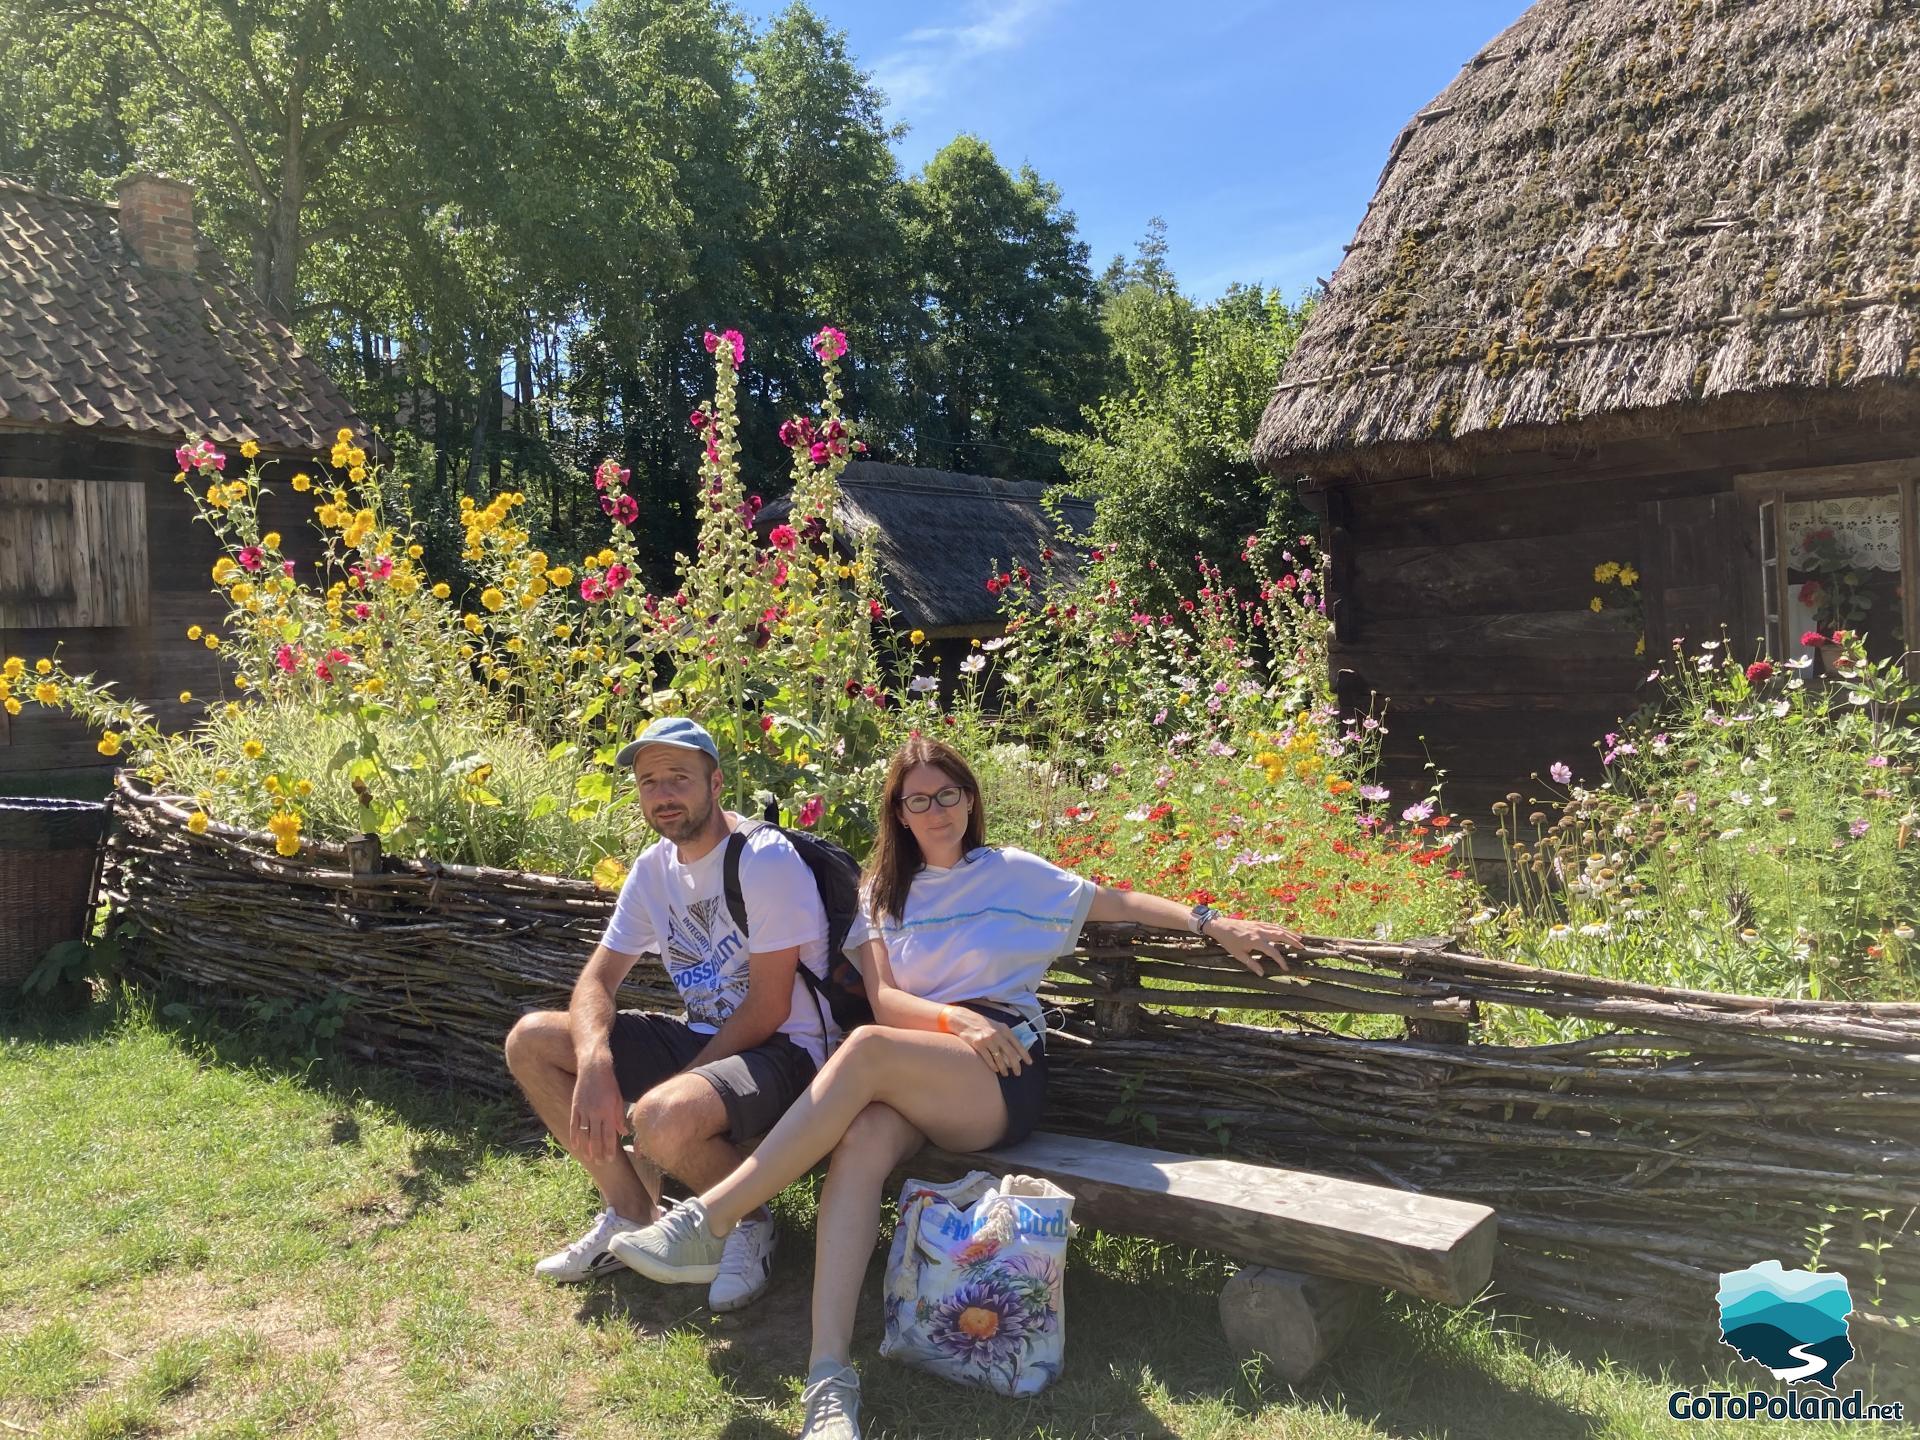 a man and a woman are sitting on a wooden bench, there are 3 huts behind them, wildflowers of different colors grow outside the huts